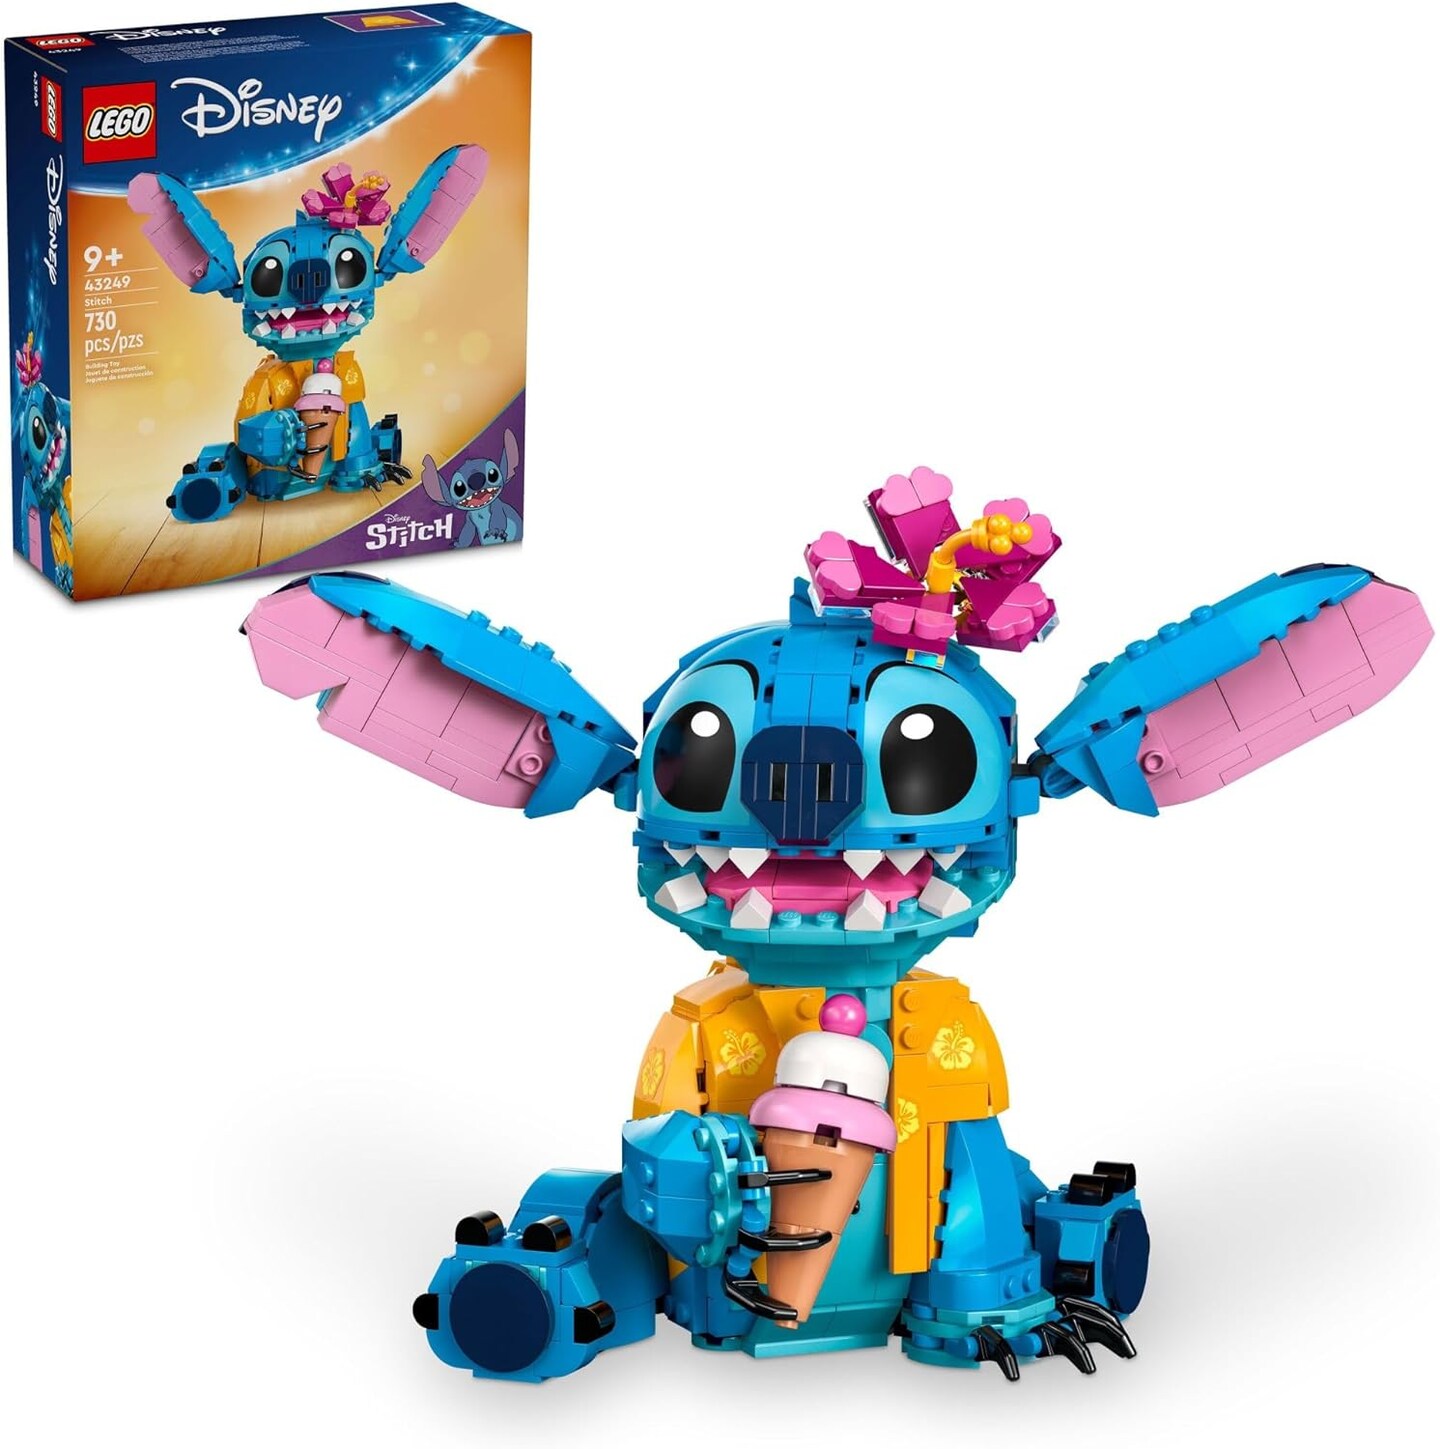 LEGO Disney Stitch Toy Building Kit, Disney Toy for 9 Year Old Kids, Buildable Figure with Ice Cream Cone, Fun Disney Gift for Girls, Boys and Lovers of The.